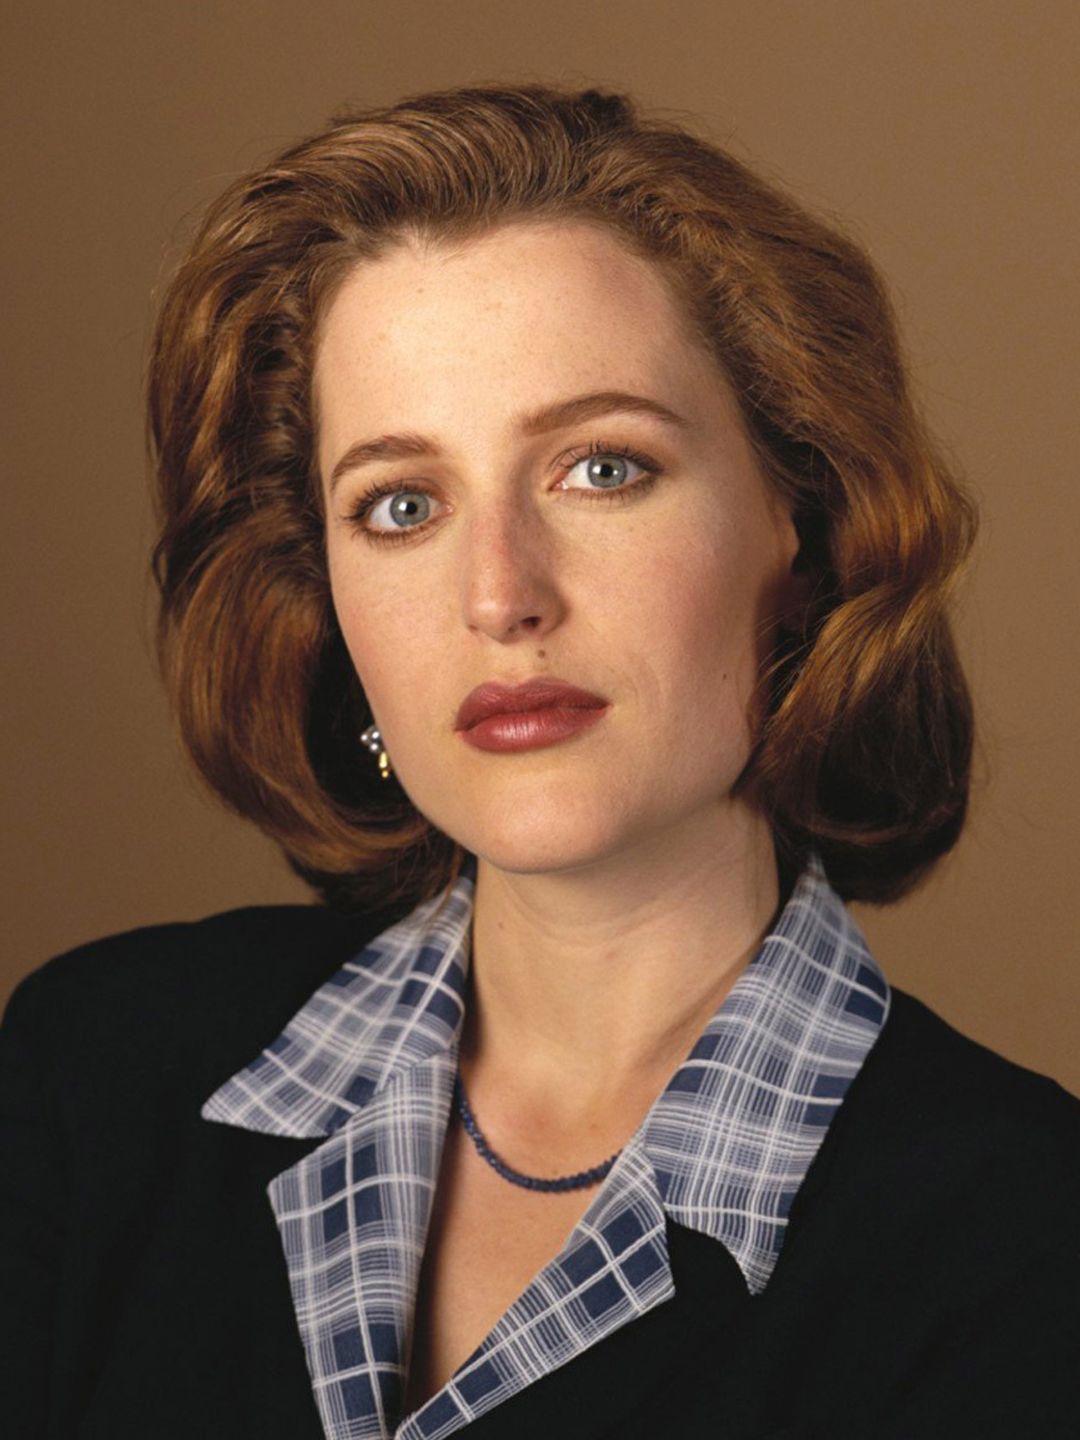 Gillian Anderson way to fame